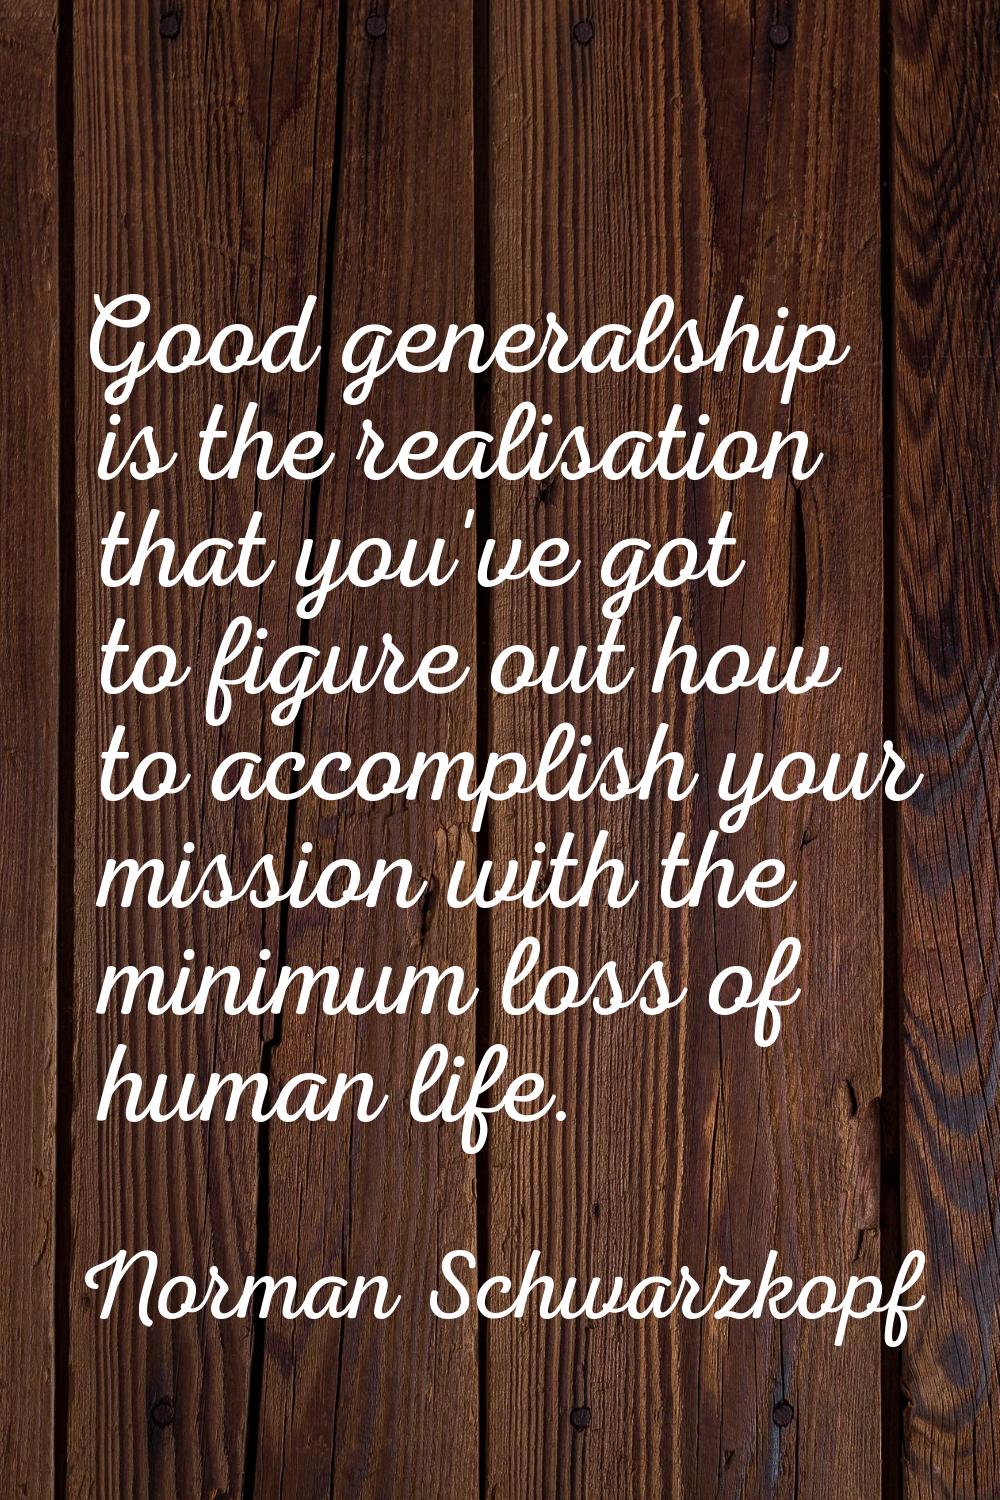 Good generalship is the realisation that you've got to figure out how to accomplish your mission wi